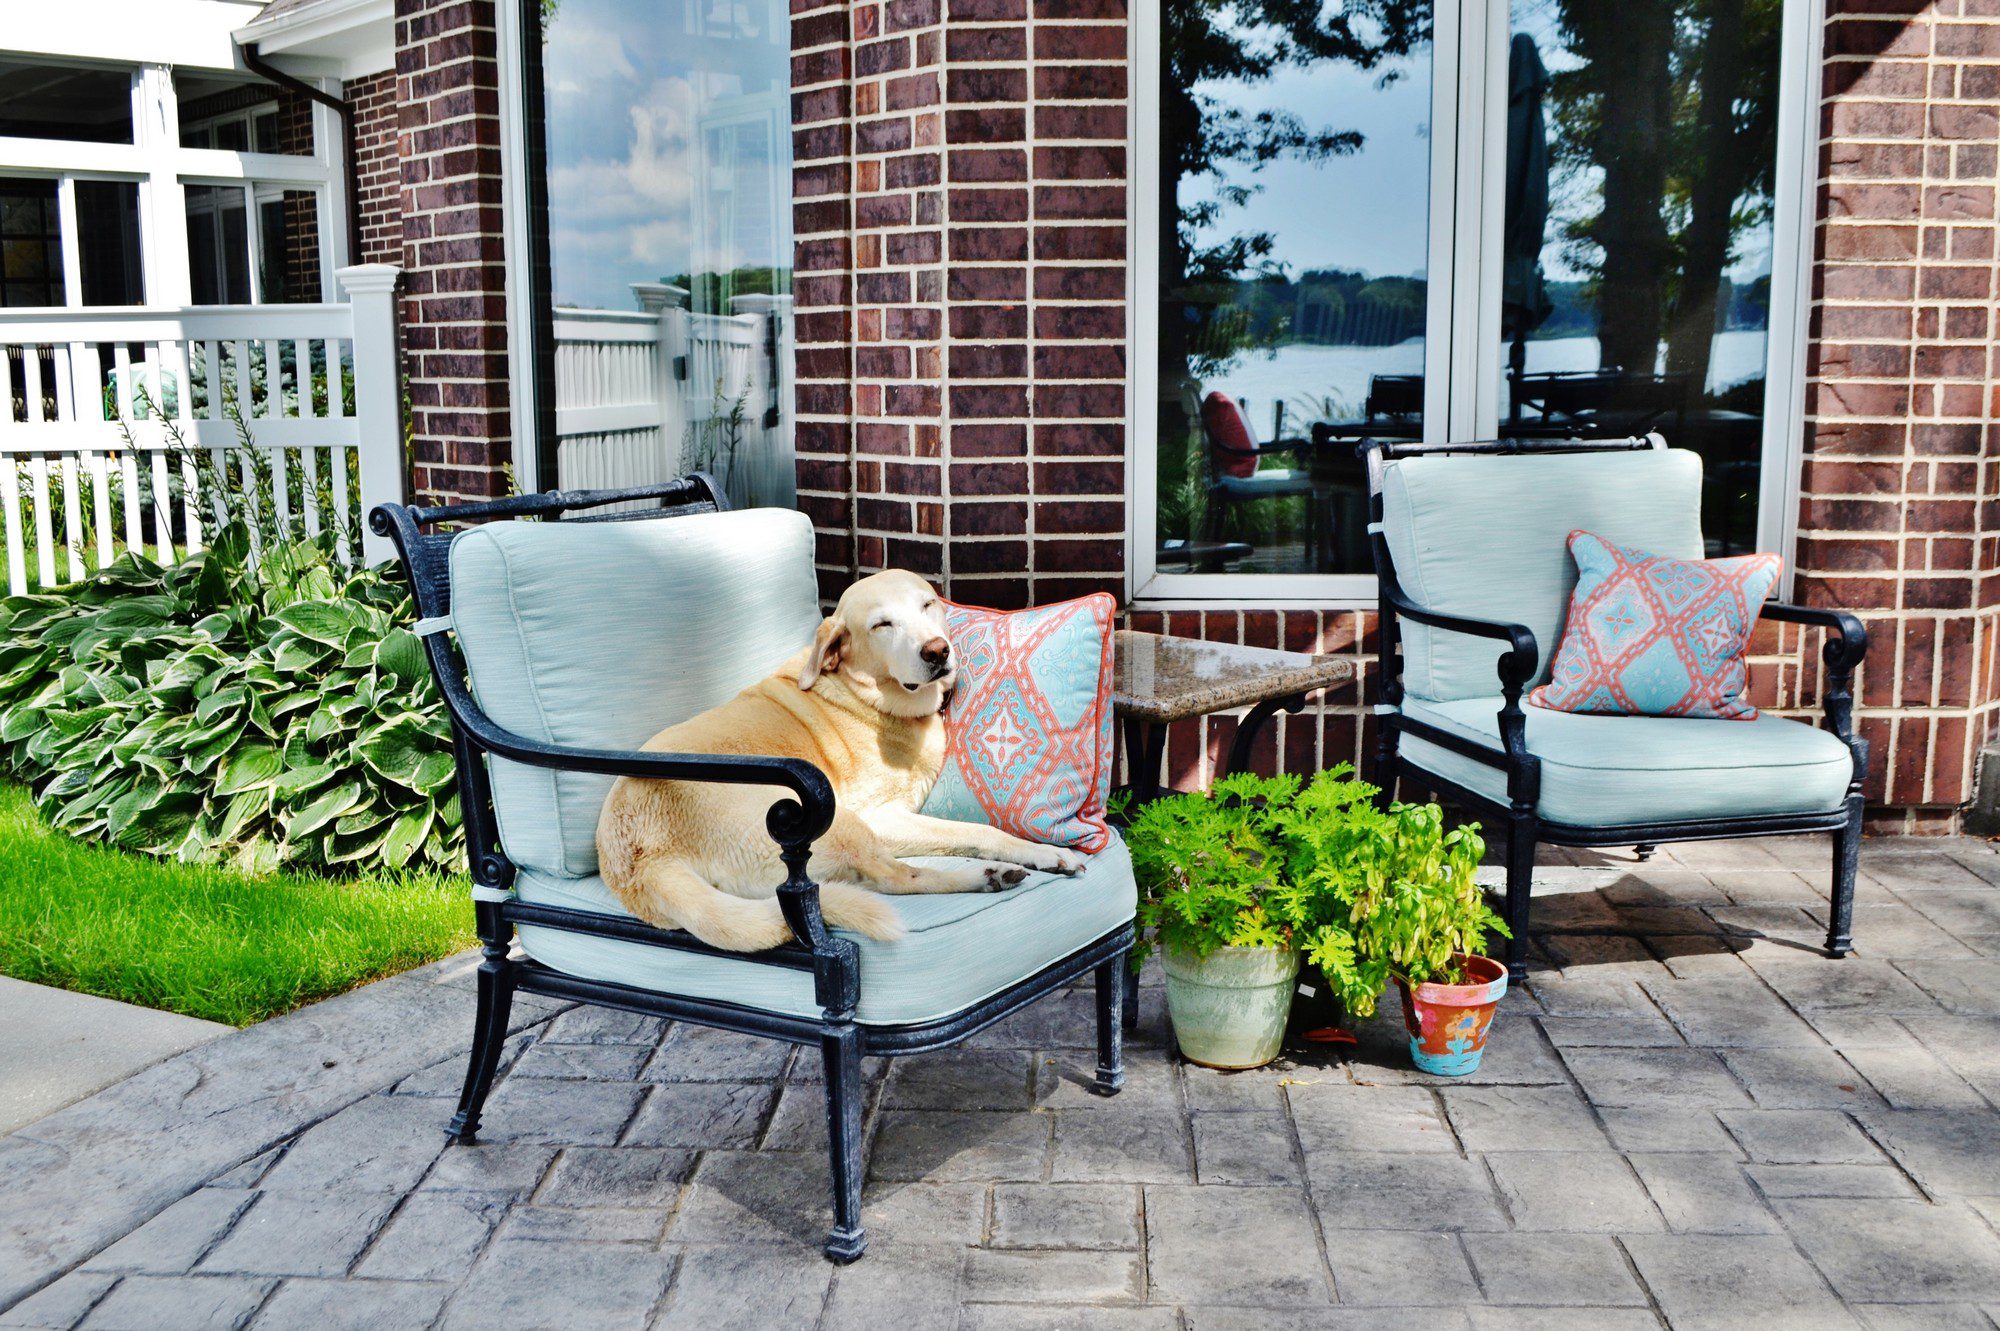 The image shows an outdoor patio setting with a relaxed dog lying on a cushioned armchair. The dog appears to be enjoying the comfort of the chair, with a tranquil expression on its face.In the background, there's a brick house with large windows reflecting the scenery, which includes trees and a body of water, suggesting a lakeside or riverside location. A white railing indicates there might be a deck or porch area.Beside the chair with the dog, there is a potted plant on the ground, and there's another similar armchair next to it with a patterned pillow. The patio floor is made of stone pavers, and there's a well-manicured lawn adjacent to the patio. Hosta plants can be seen in the garden area next to the railing. The scene conveys a peaceful and leisurely setting, ideal for relaxation.